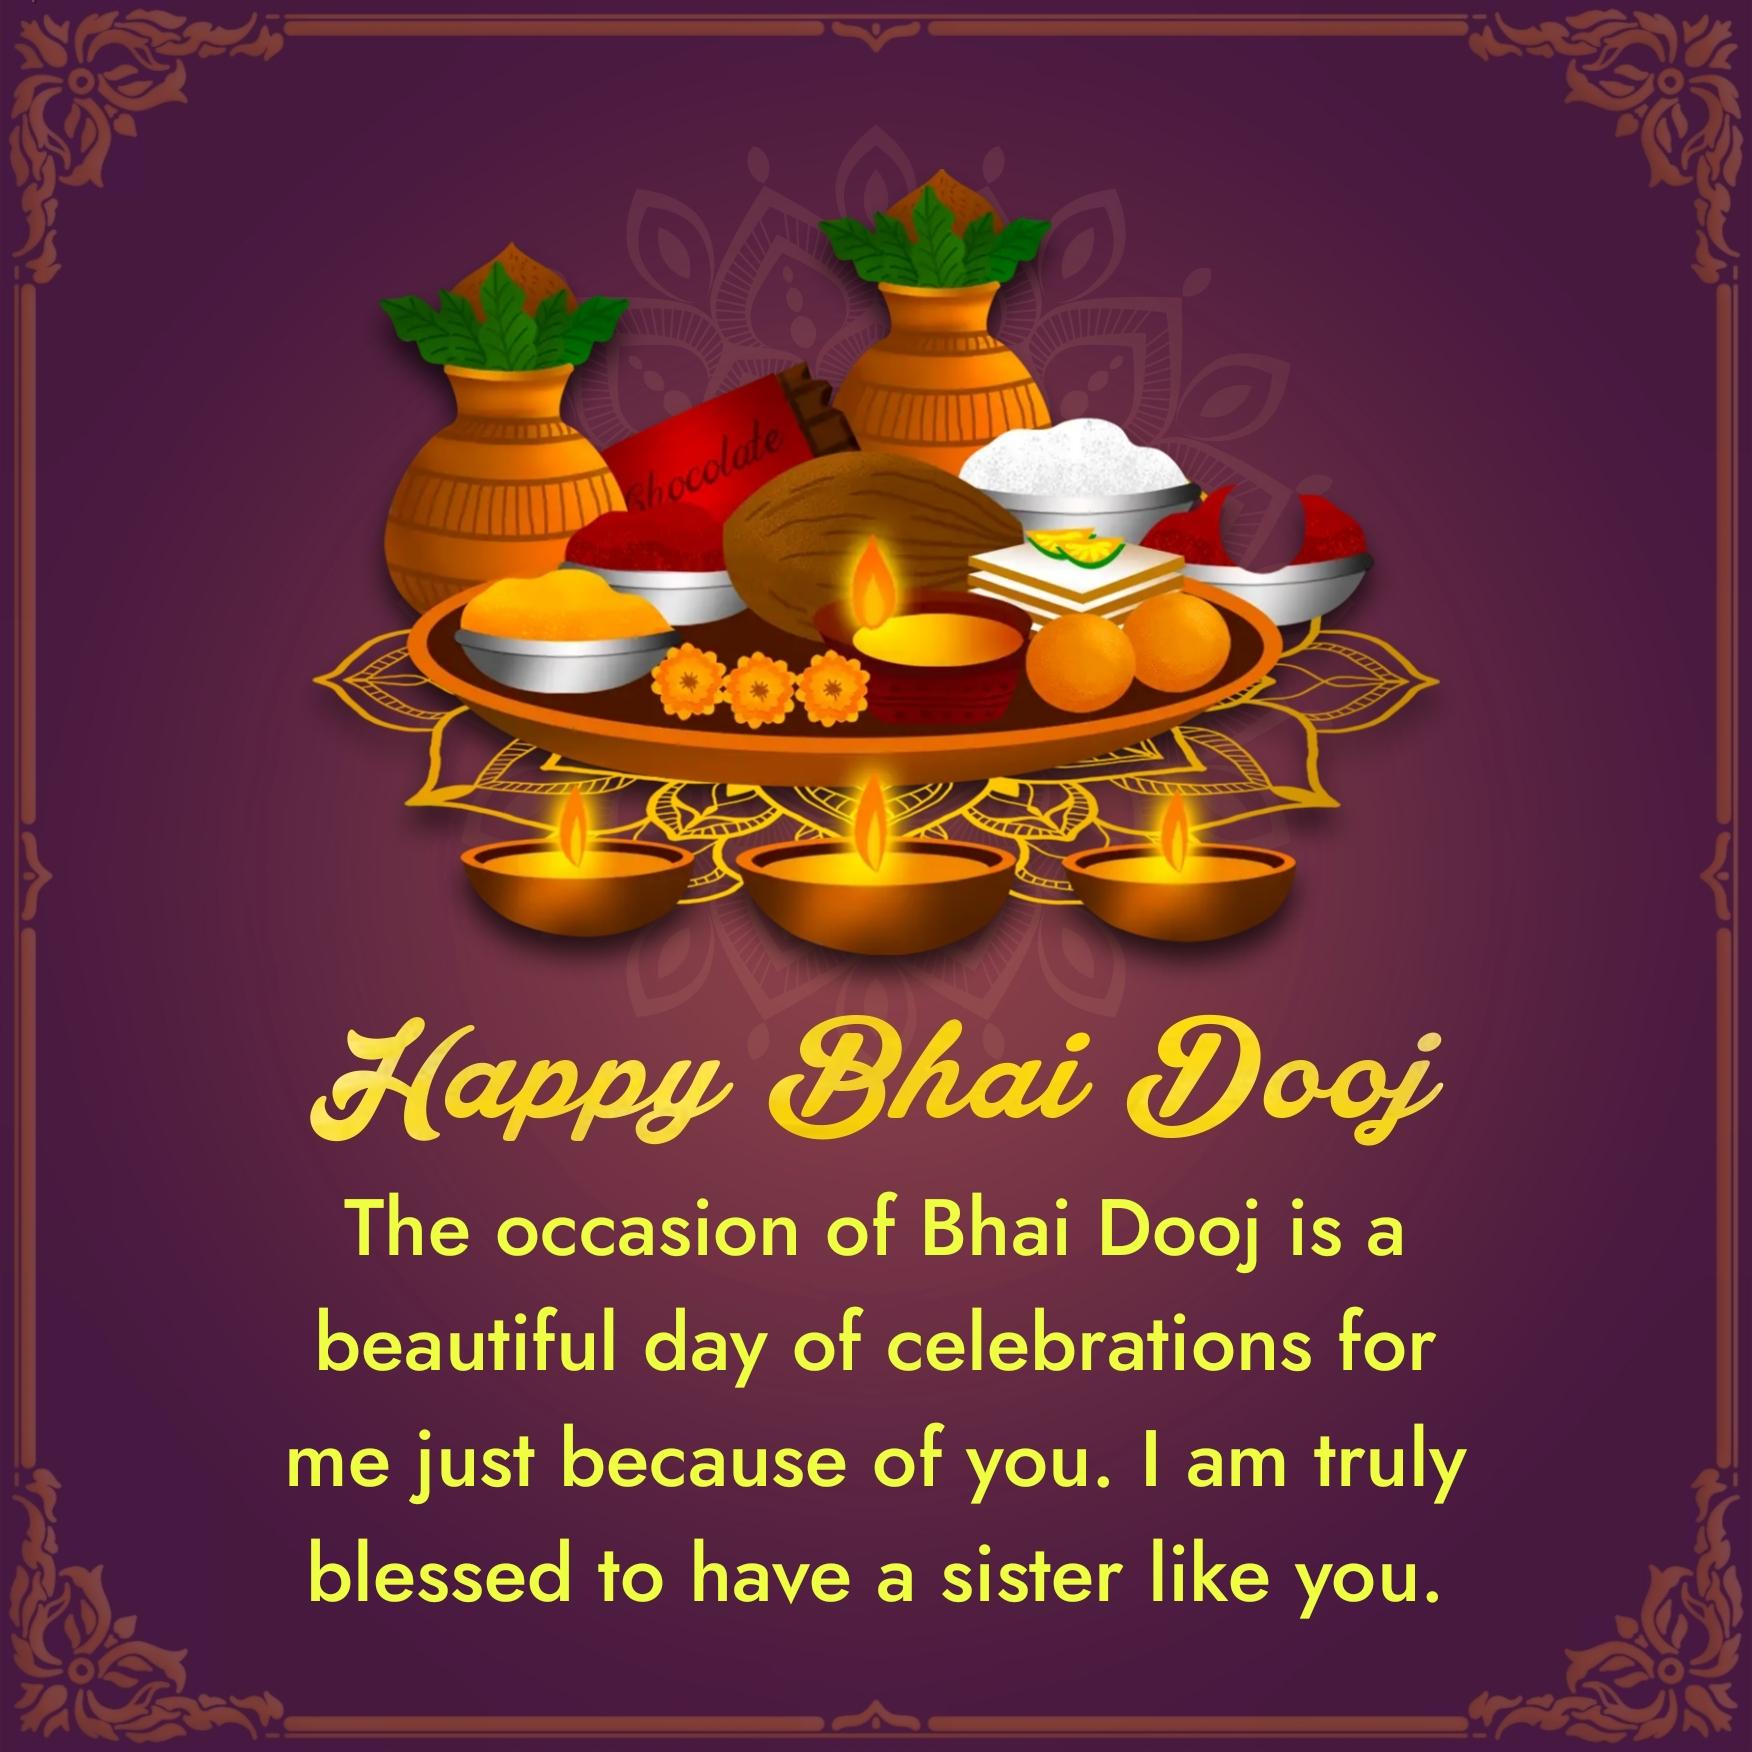 The occasion of Bhai Dooj is a beautiful day of celebrations